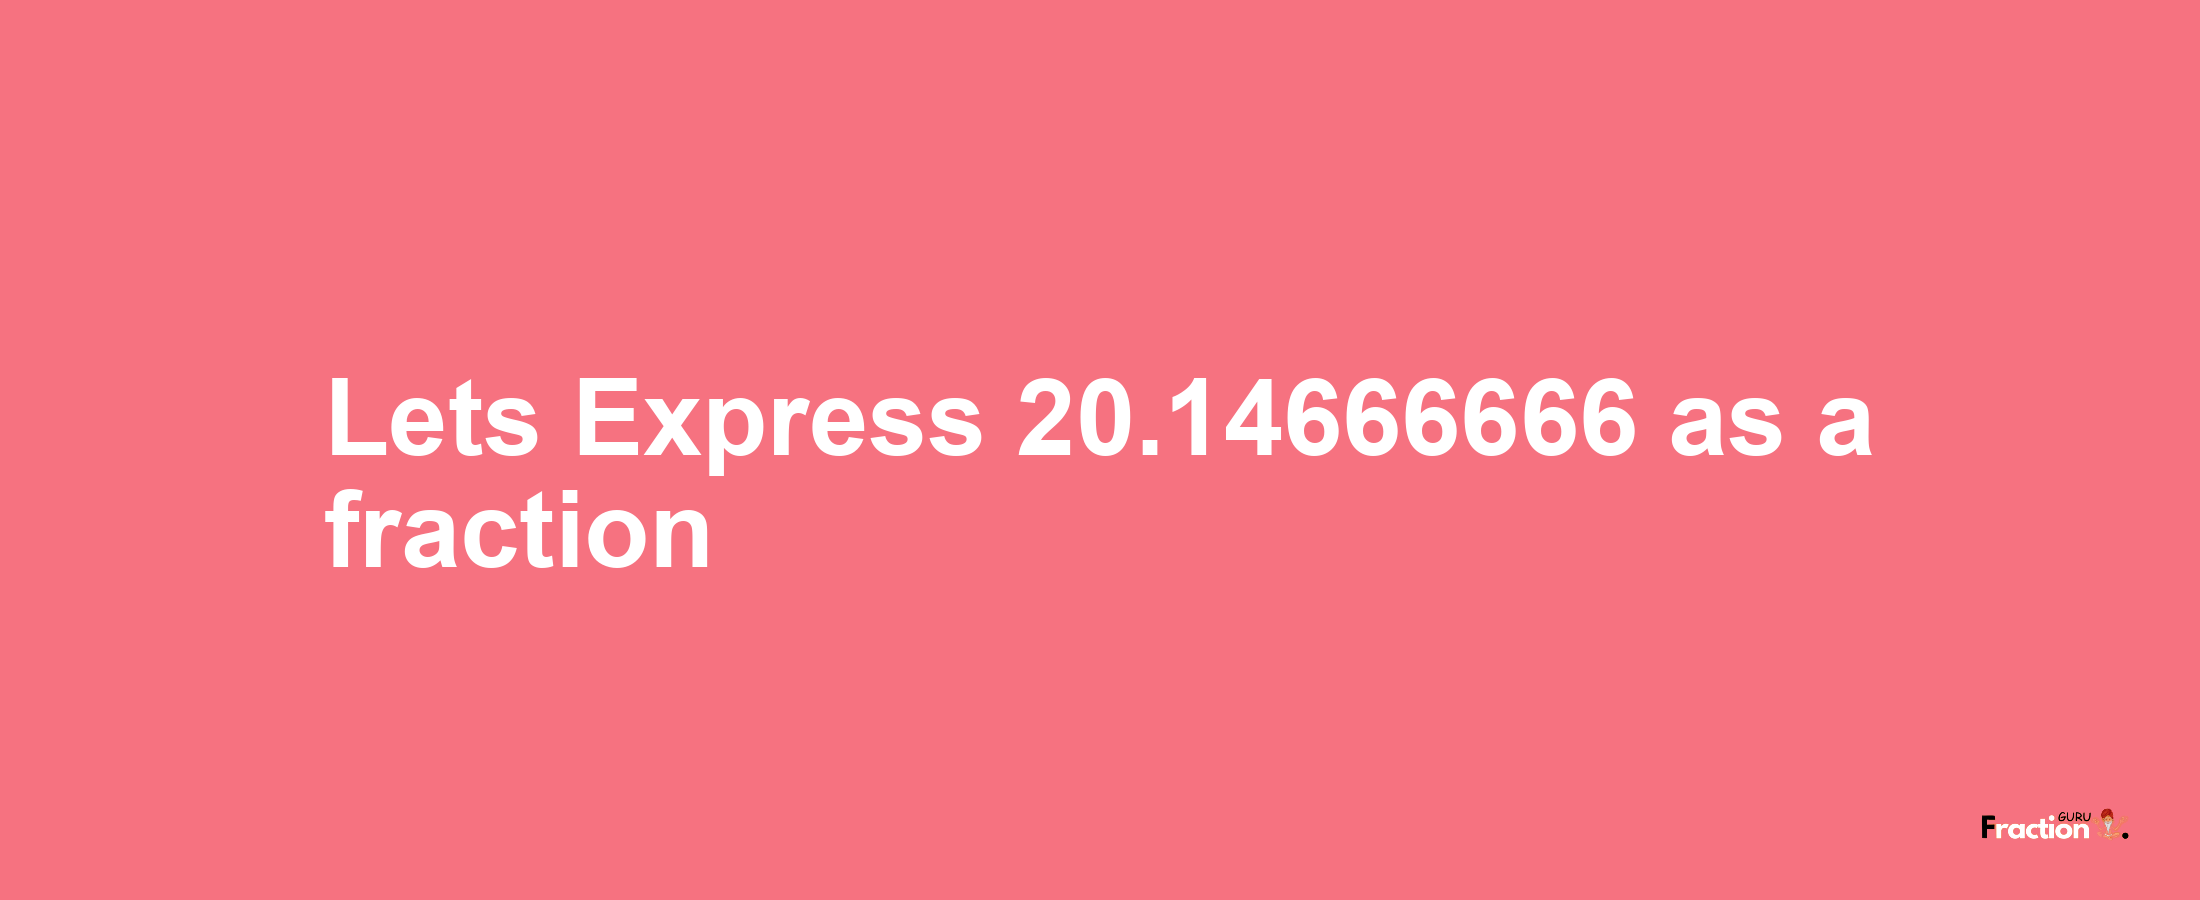 Lets Express 20.14666666 as afraction